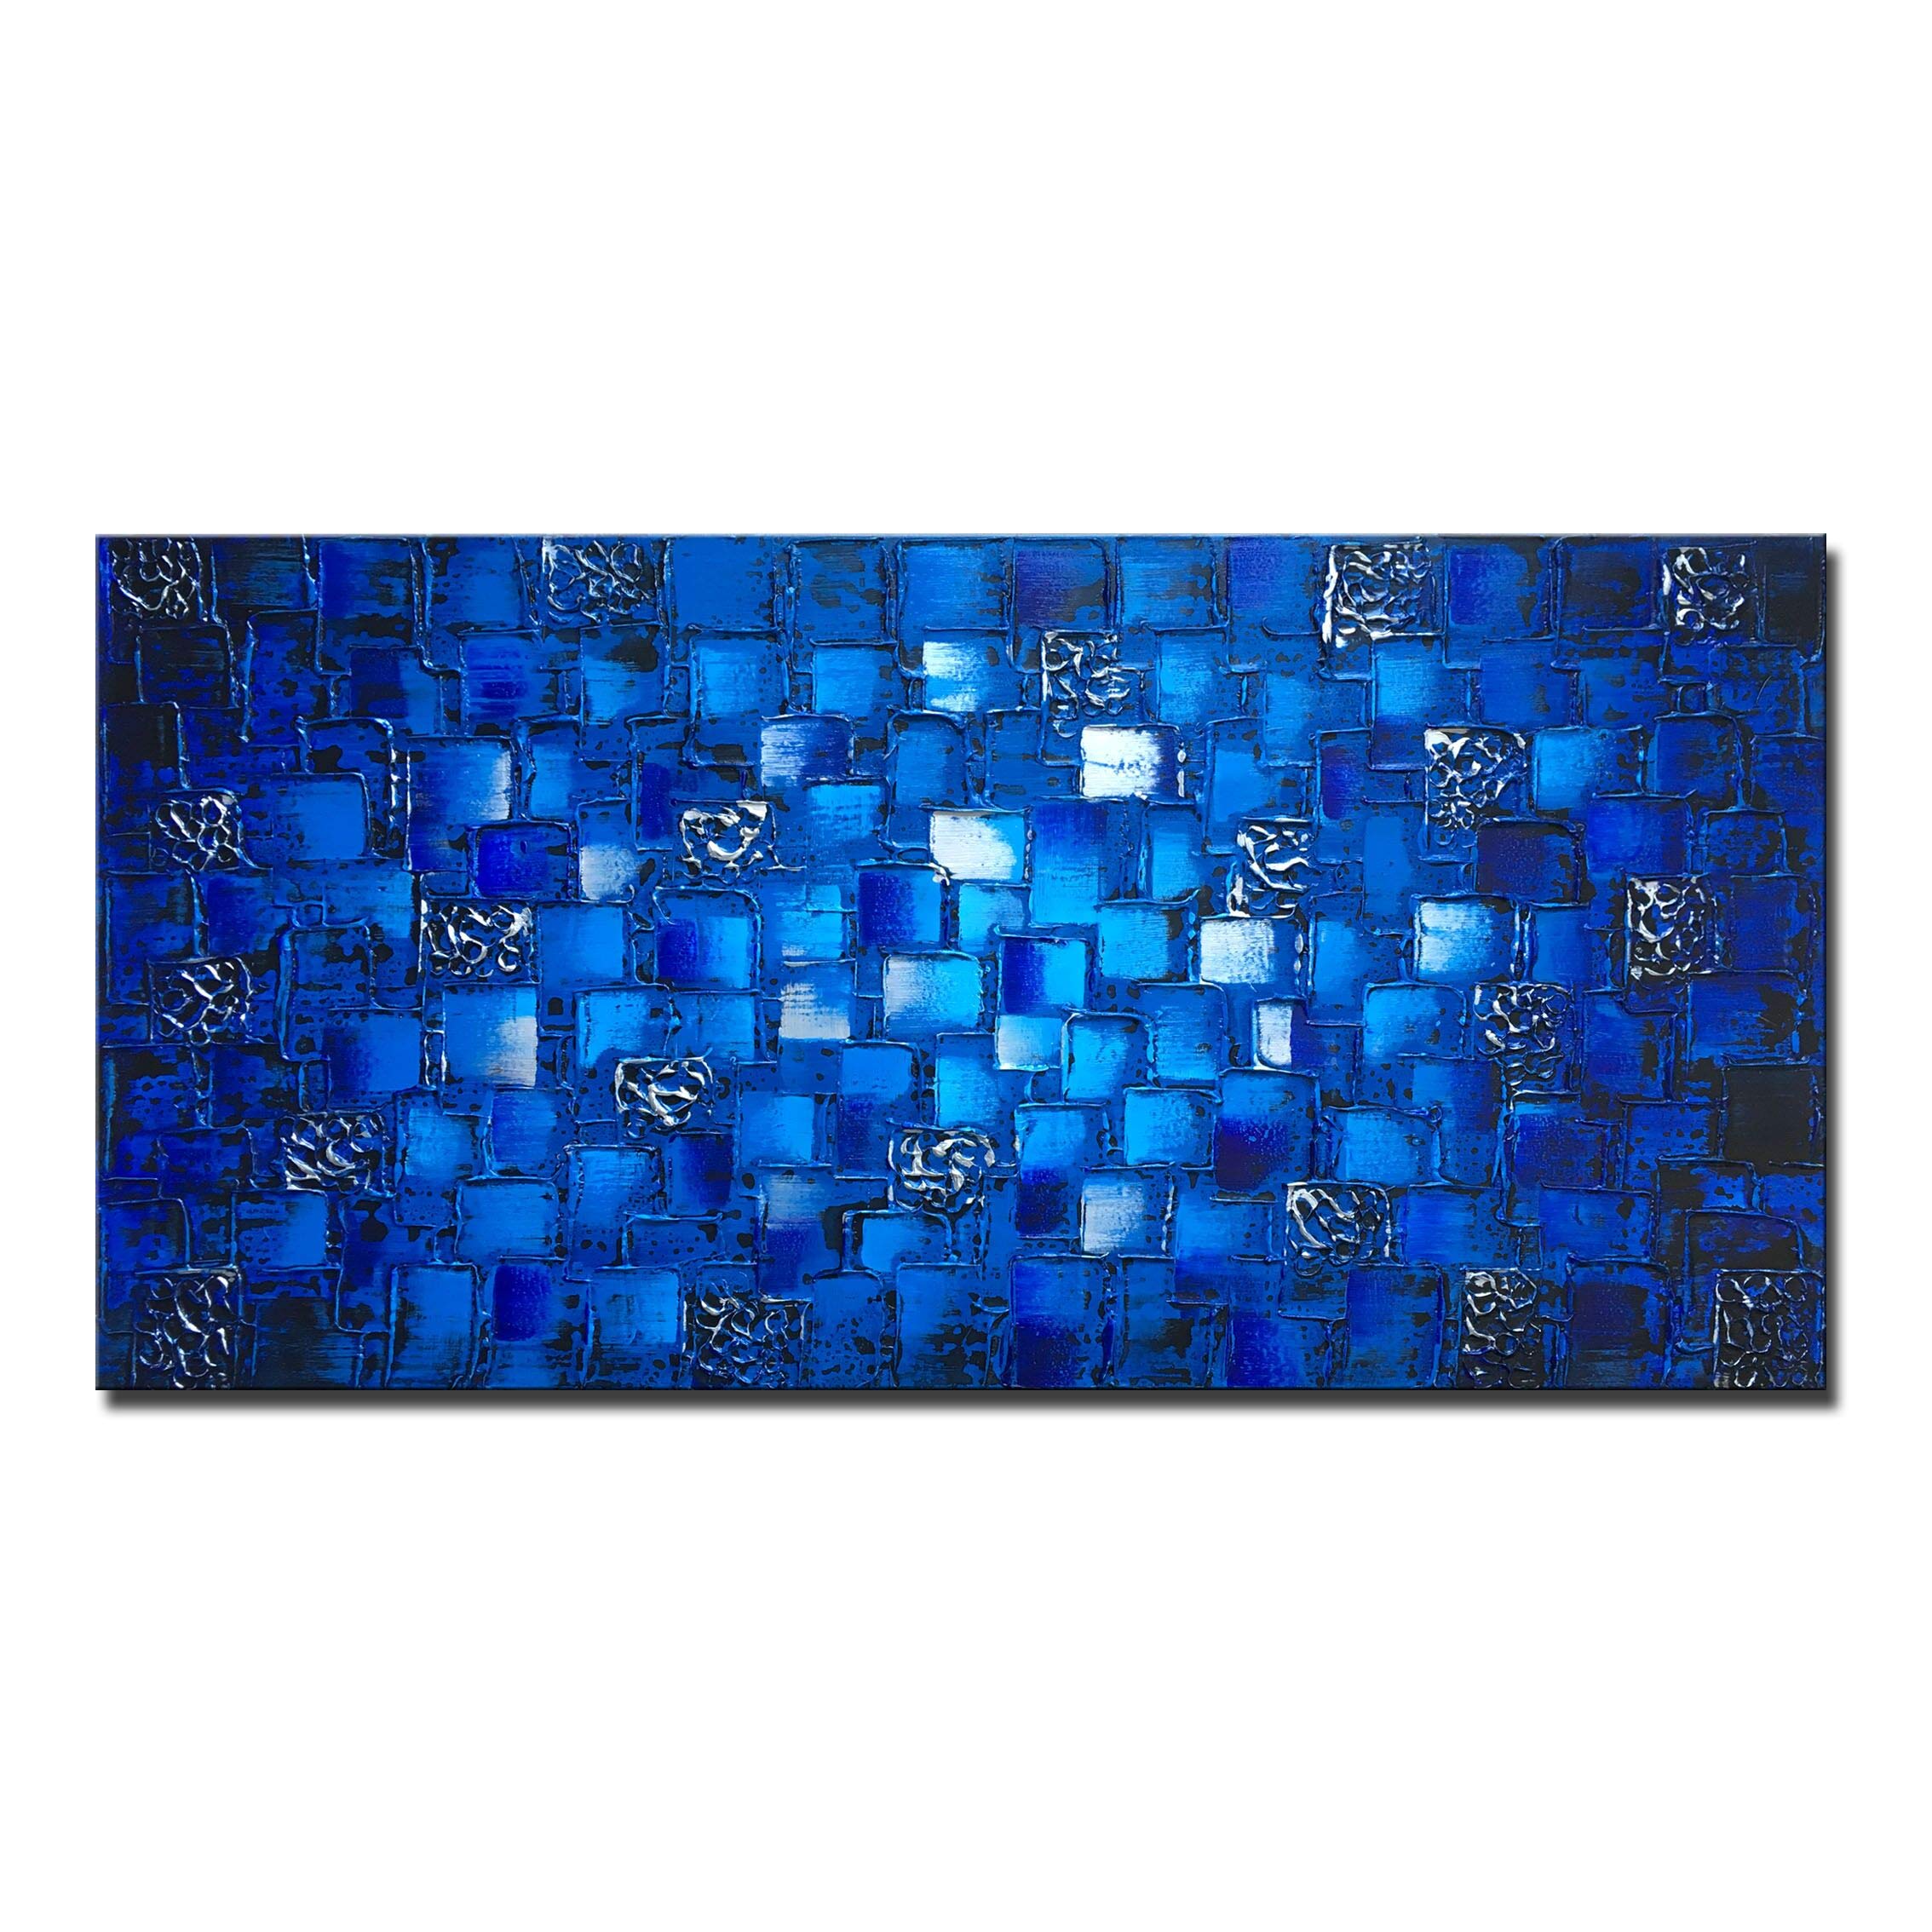 MyArton Thick Textured Abstract Squares Canvas Wall Art Hand Painted Artwork Modern Dark Blue add Silver Oil Painting for Home Decor Framed Ready to Hang 48x24inch